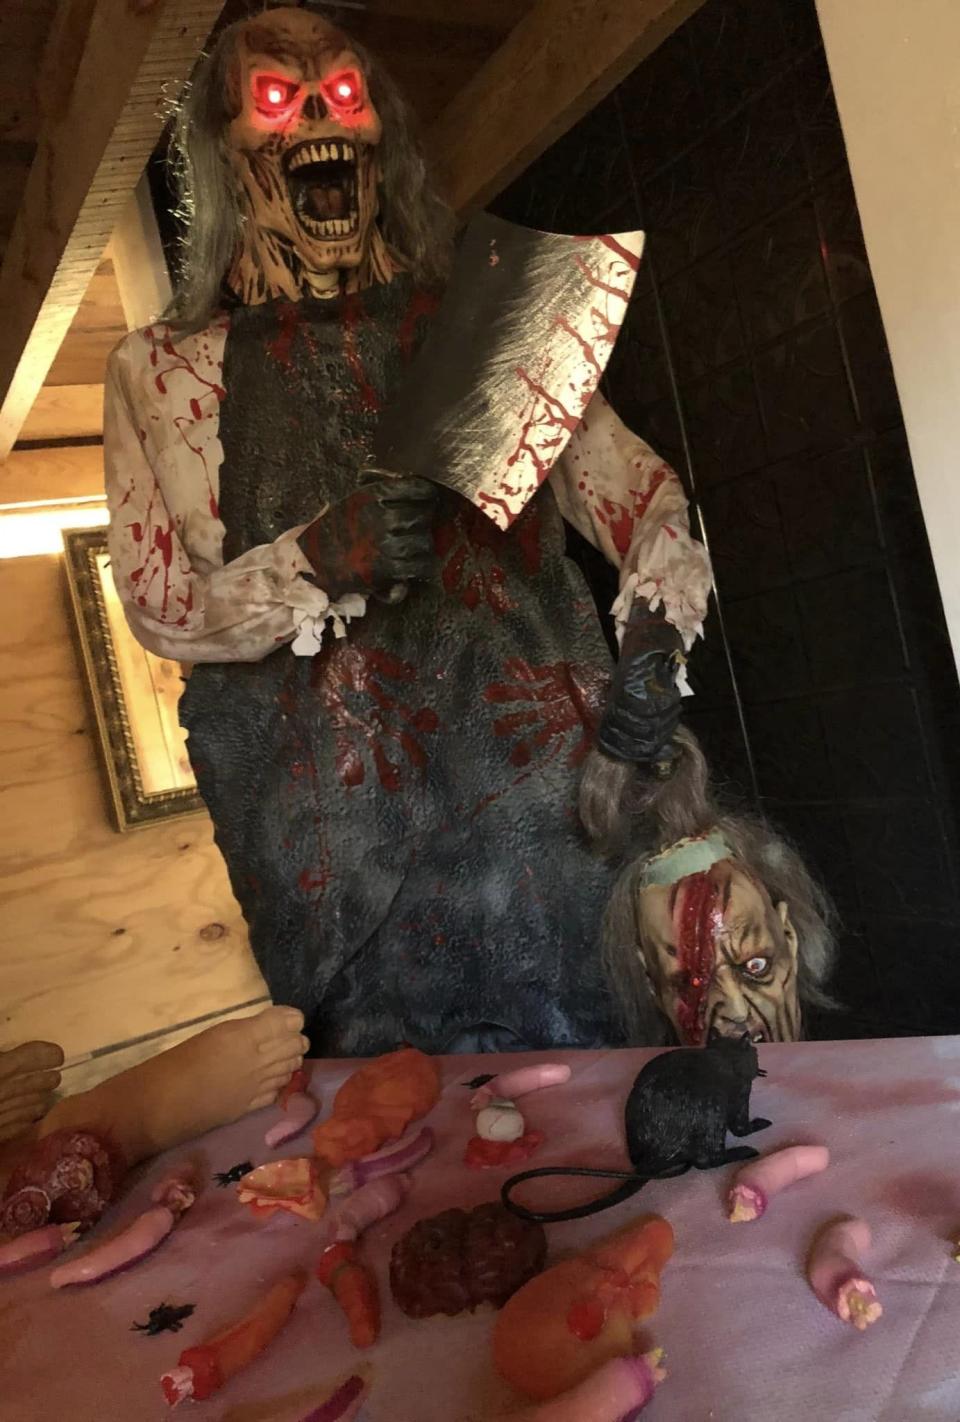 A scary prop in the Spooky Cabin at the 2022 Rassawek Autumn Festival in Goochland County.